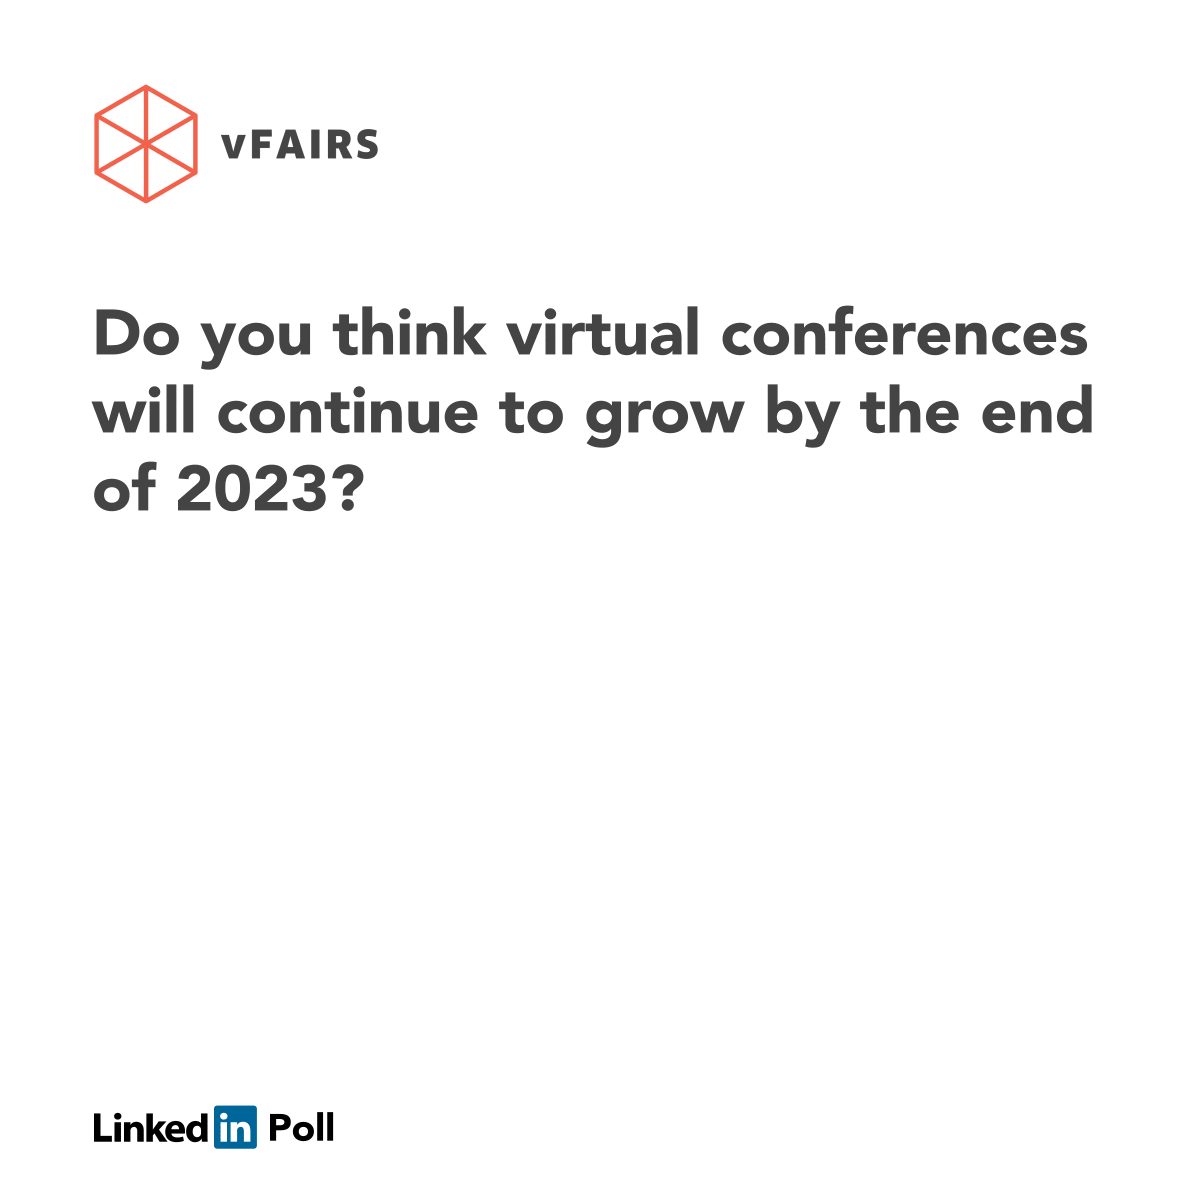 43% believe virtual is the new norm in our survey for online conferences